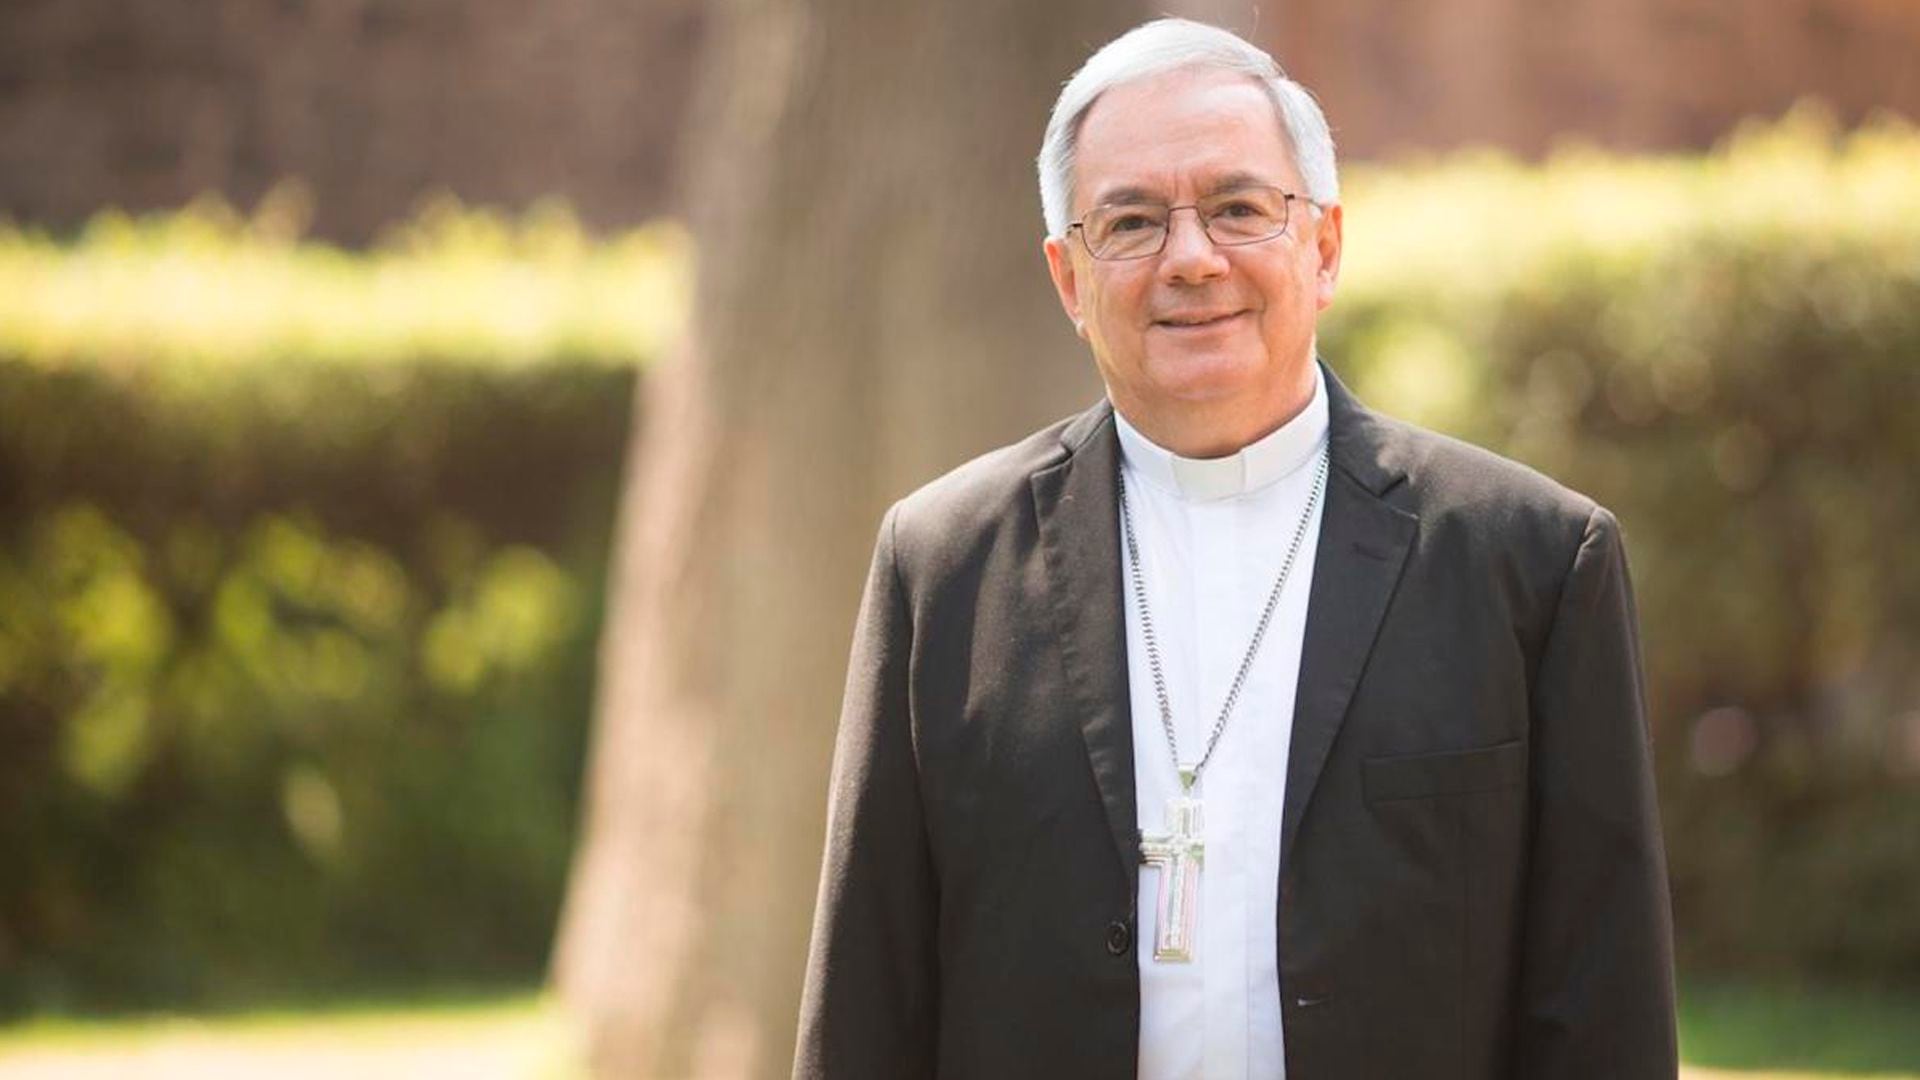 Francisco Daniel Rivera, Auxiliary Bishop of the Archdiocese of Mexico, died of COVID-19